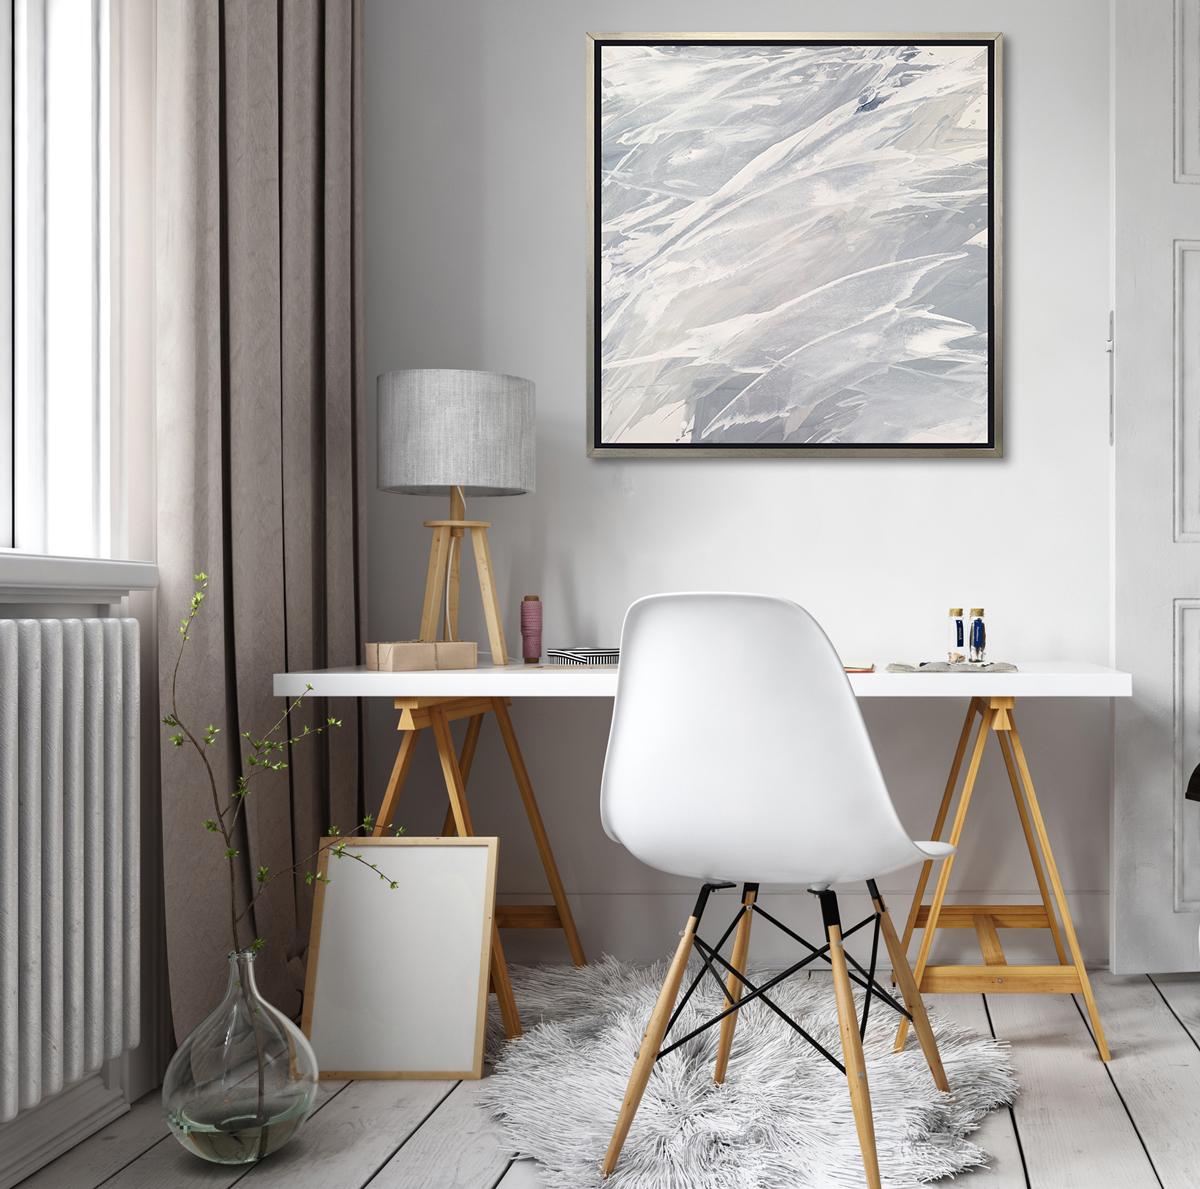 This contemporary limited edition print by Teodora Guererra features a warm grey and white palette, with layers of neutral colors that almost splash across the composition. This print pairs beautifully with the Grey Goose I and Grey Goose II limited